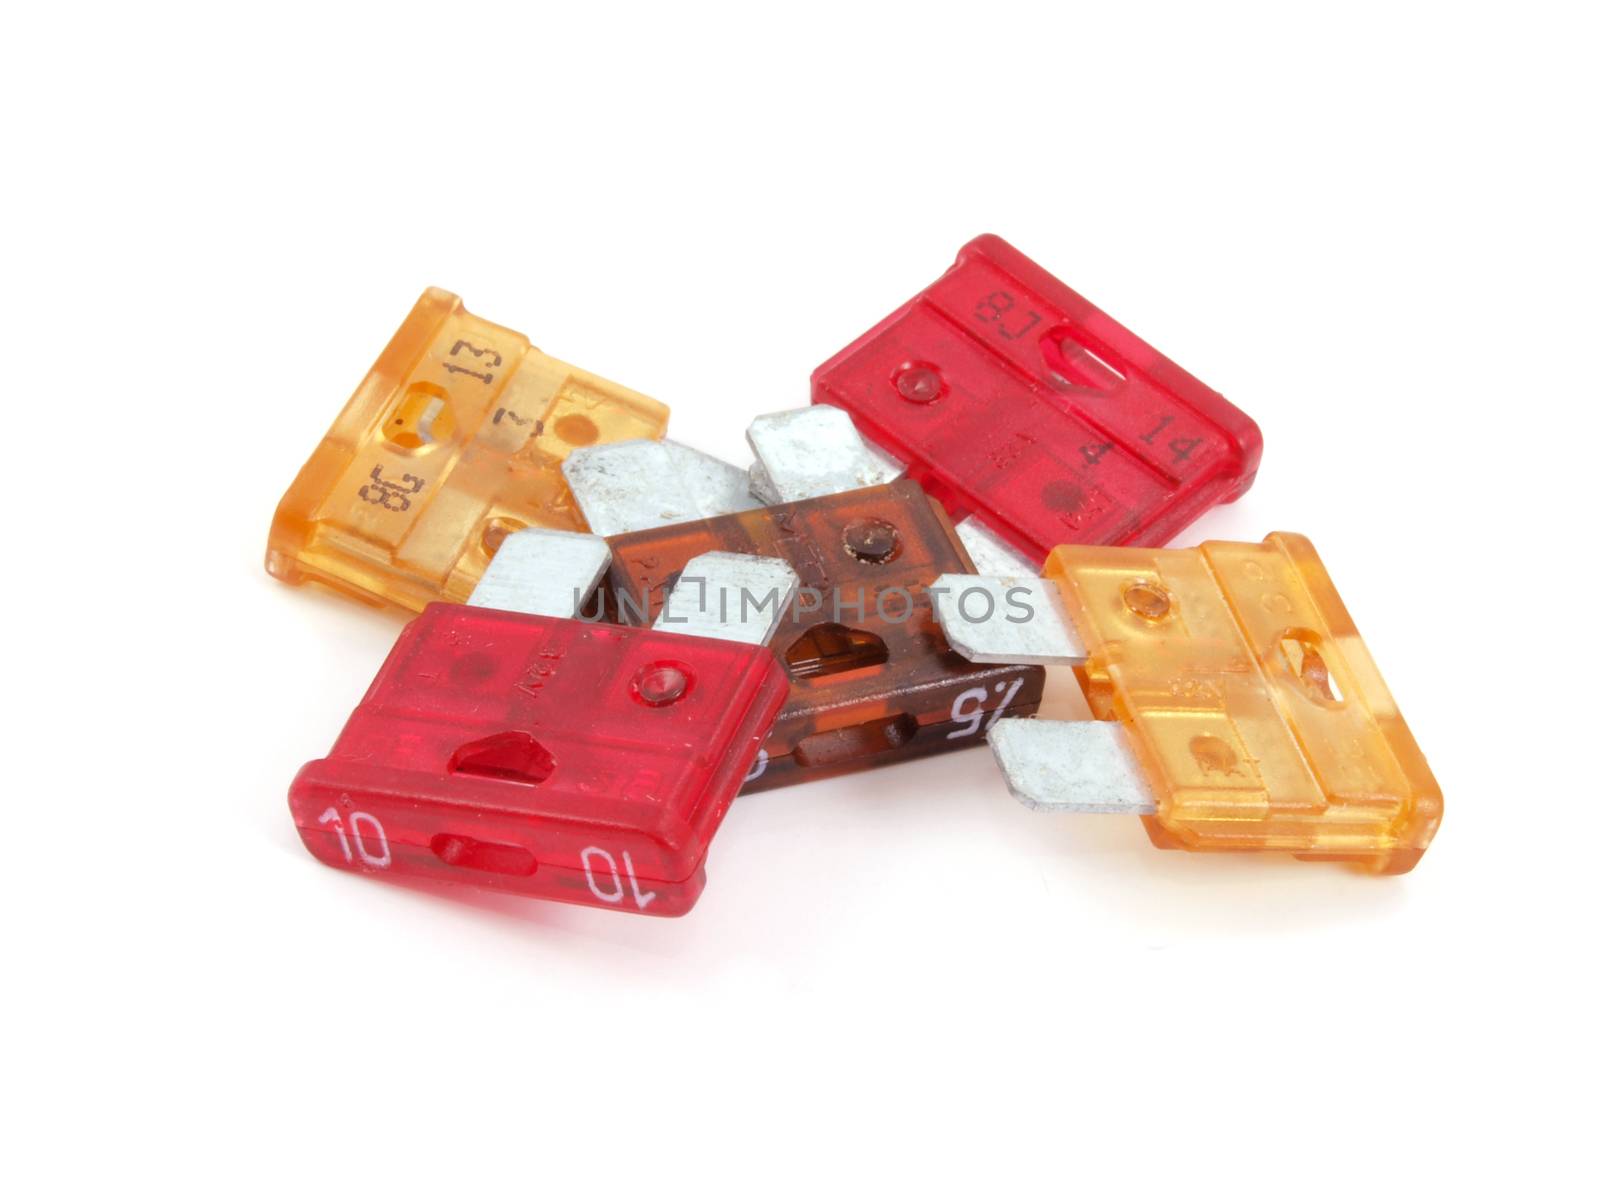 Assorted fuses as used in the  automotive industry.